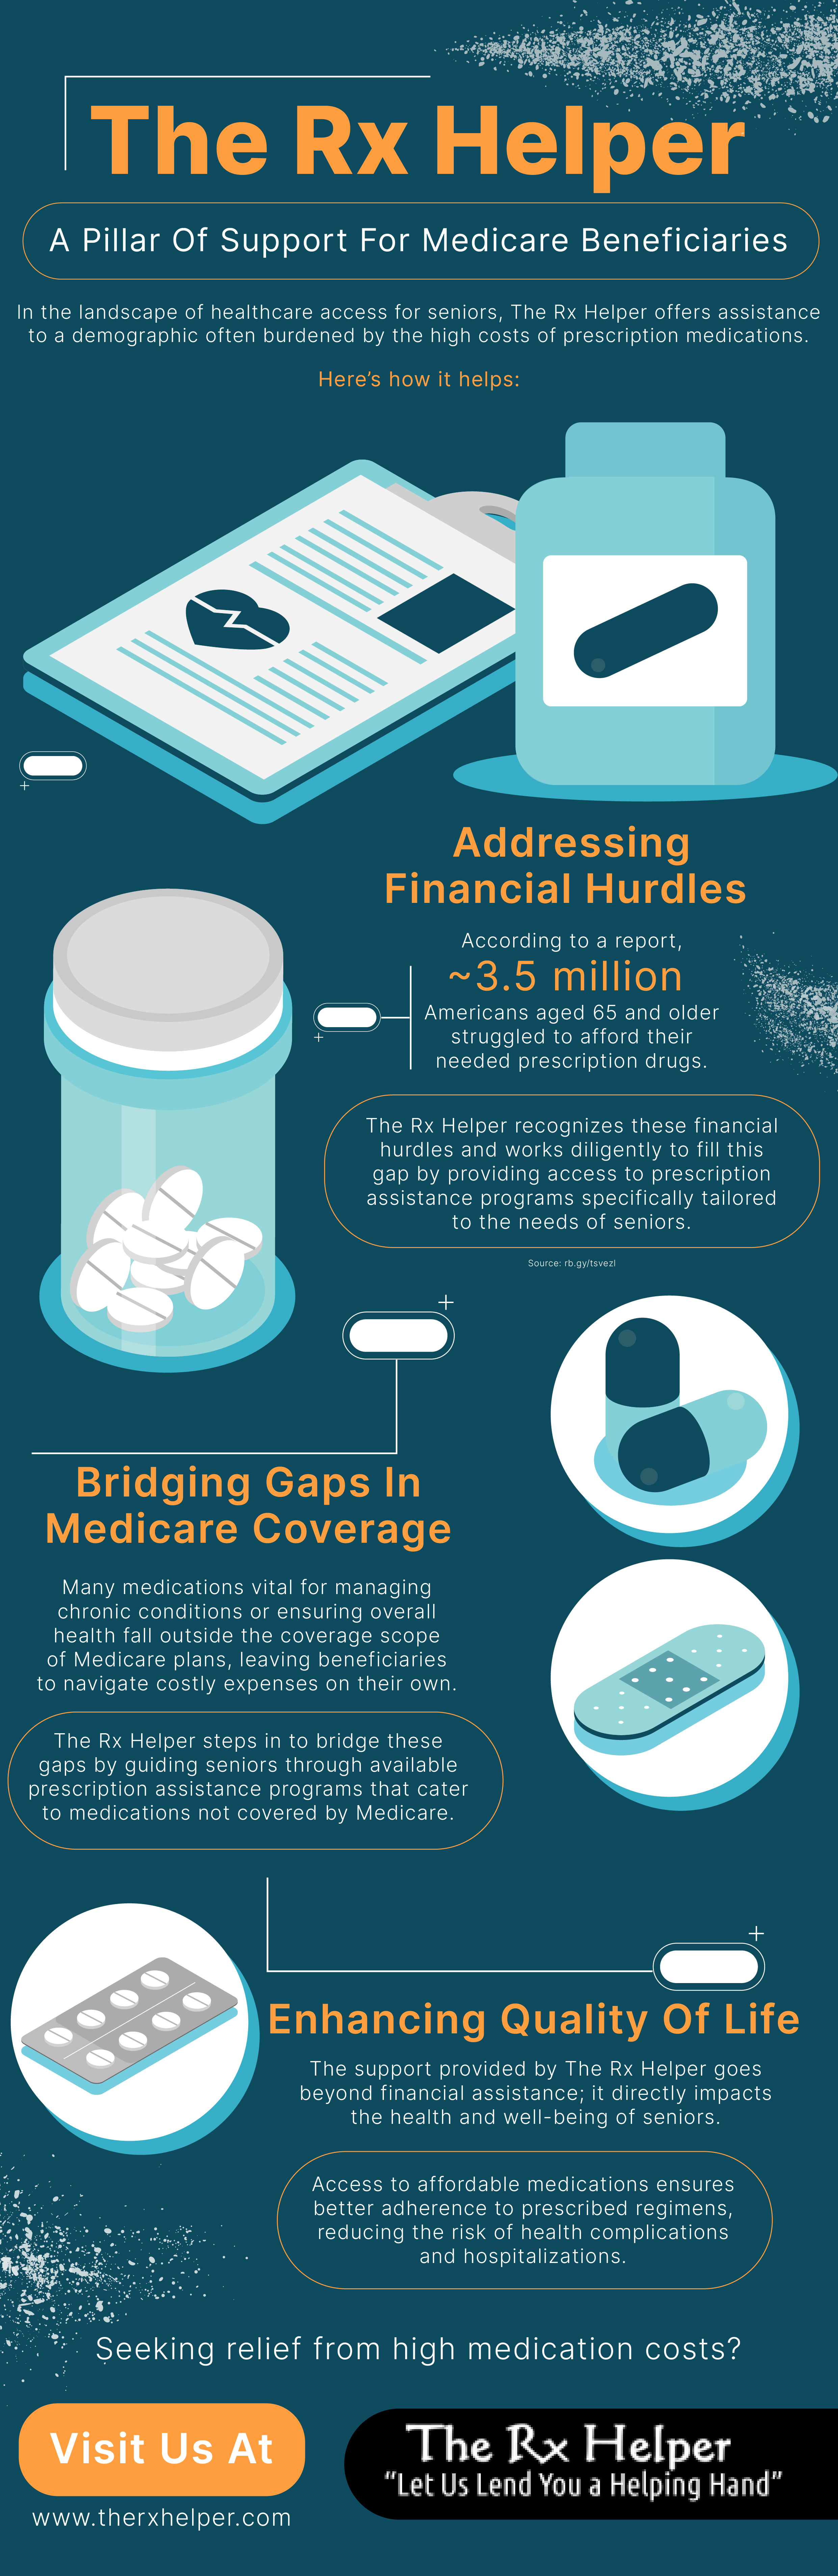 The Rx Helper: A Pillar Of Support For Seniors And Medicare Beneficiaries